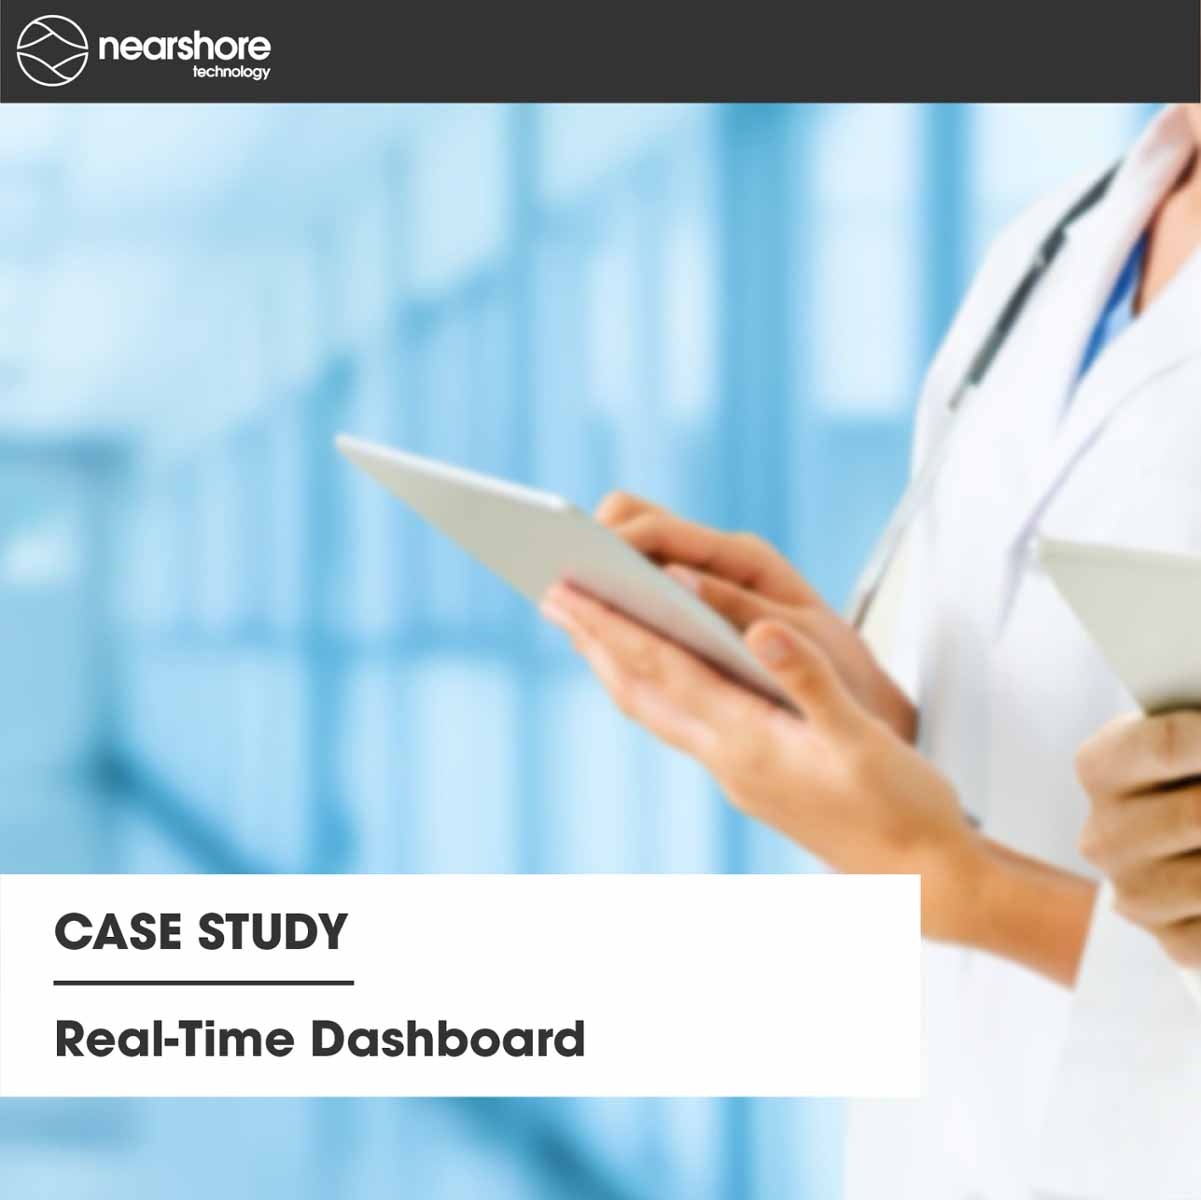 Case Study: Real-Time Dashboard